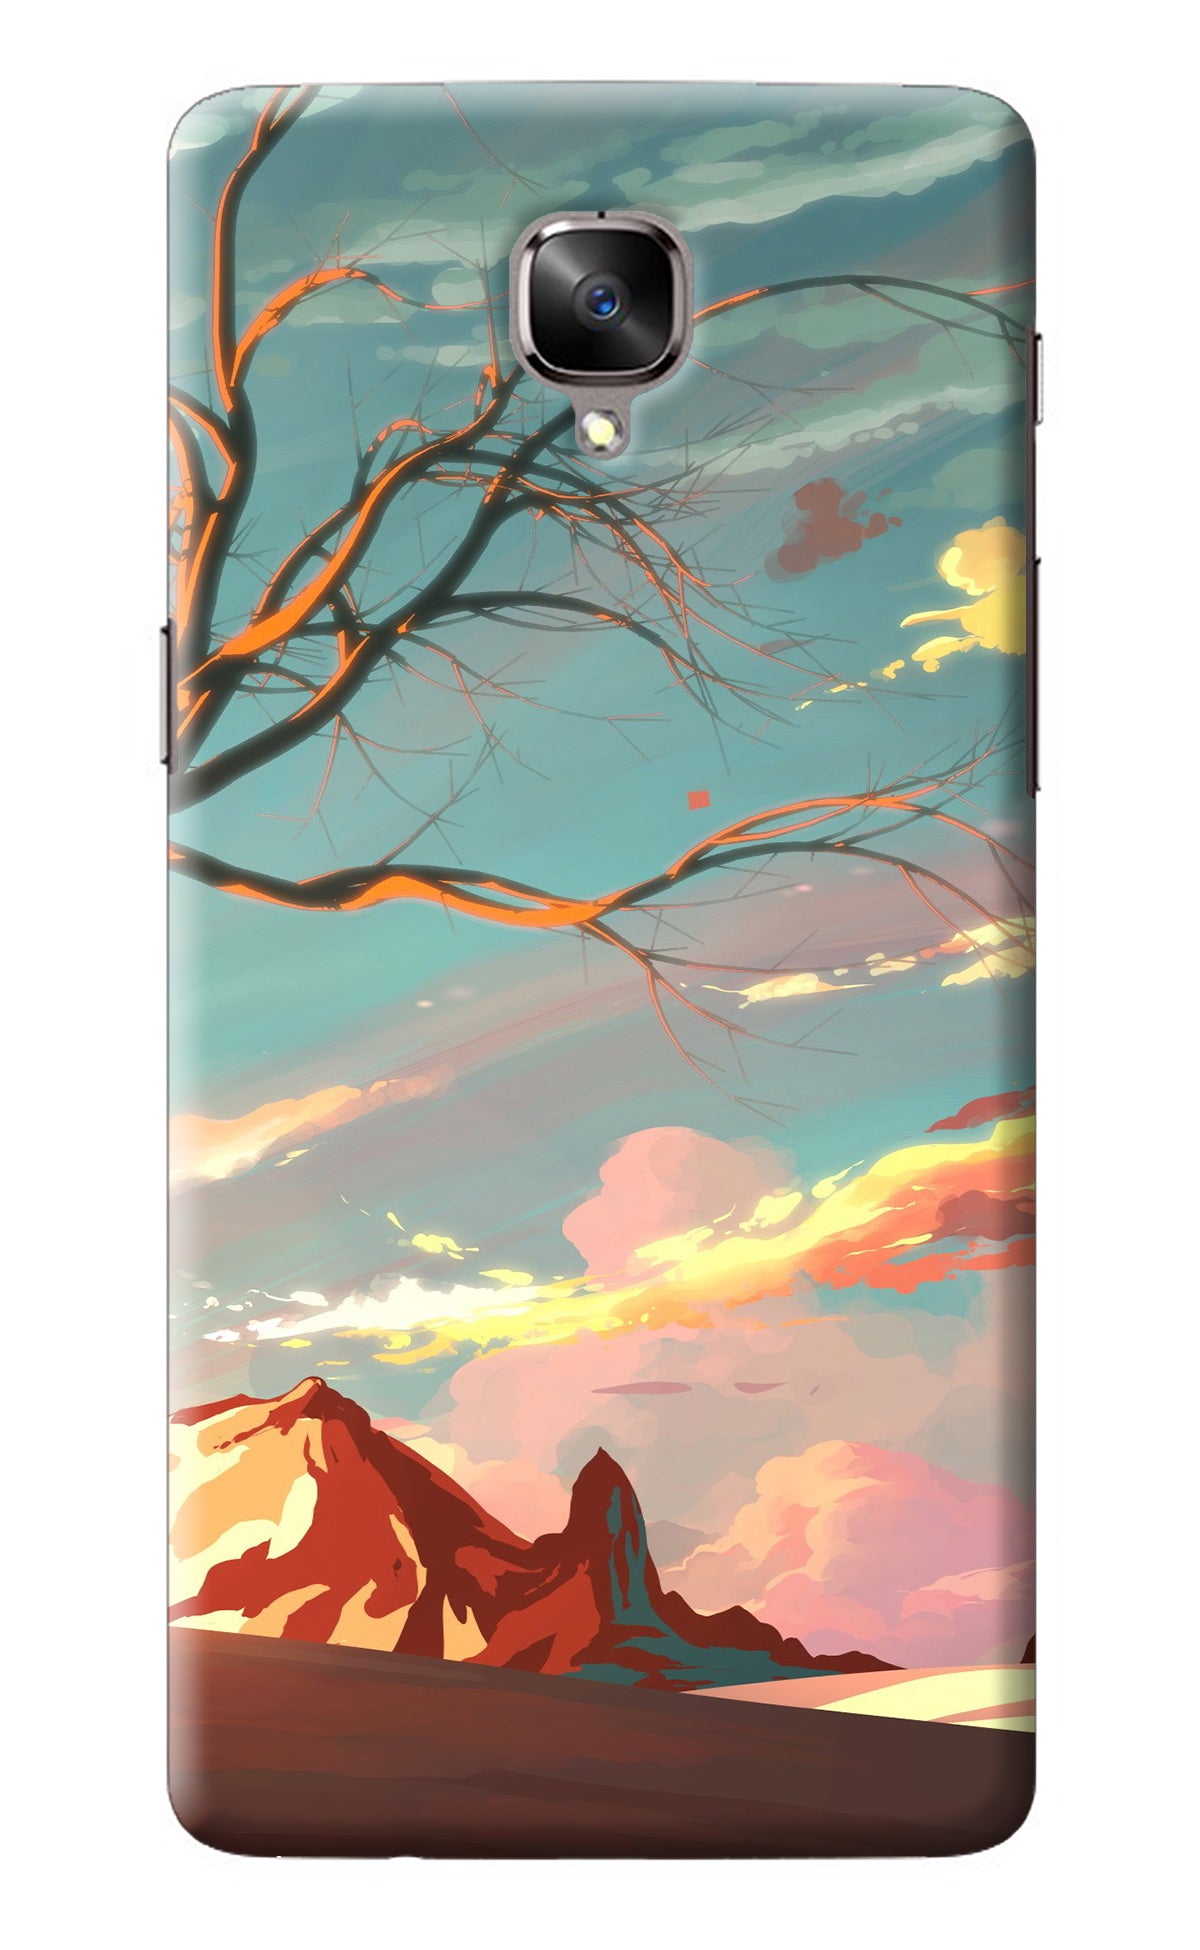 Scenery Oneplus 3/3T Back Cover